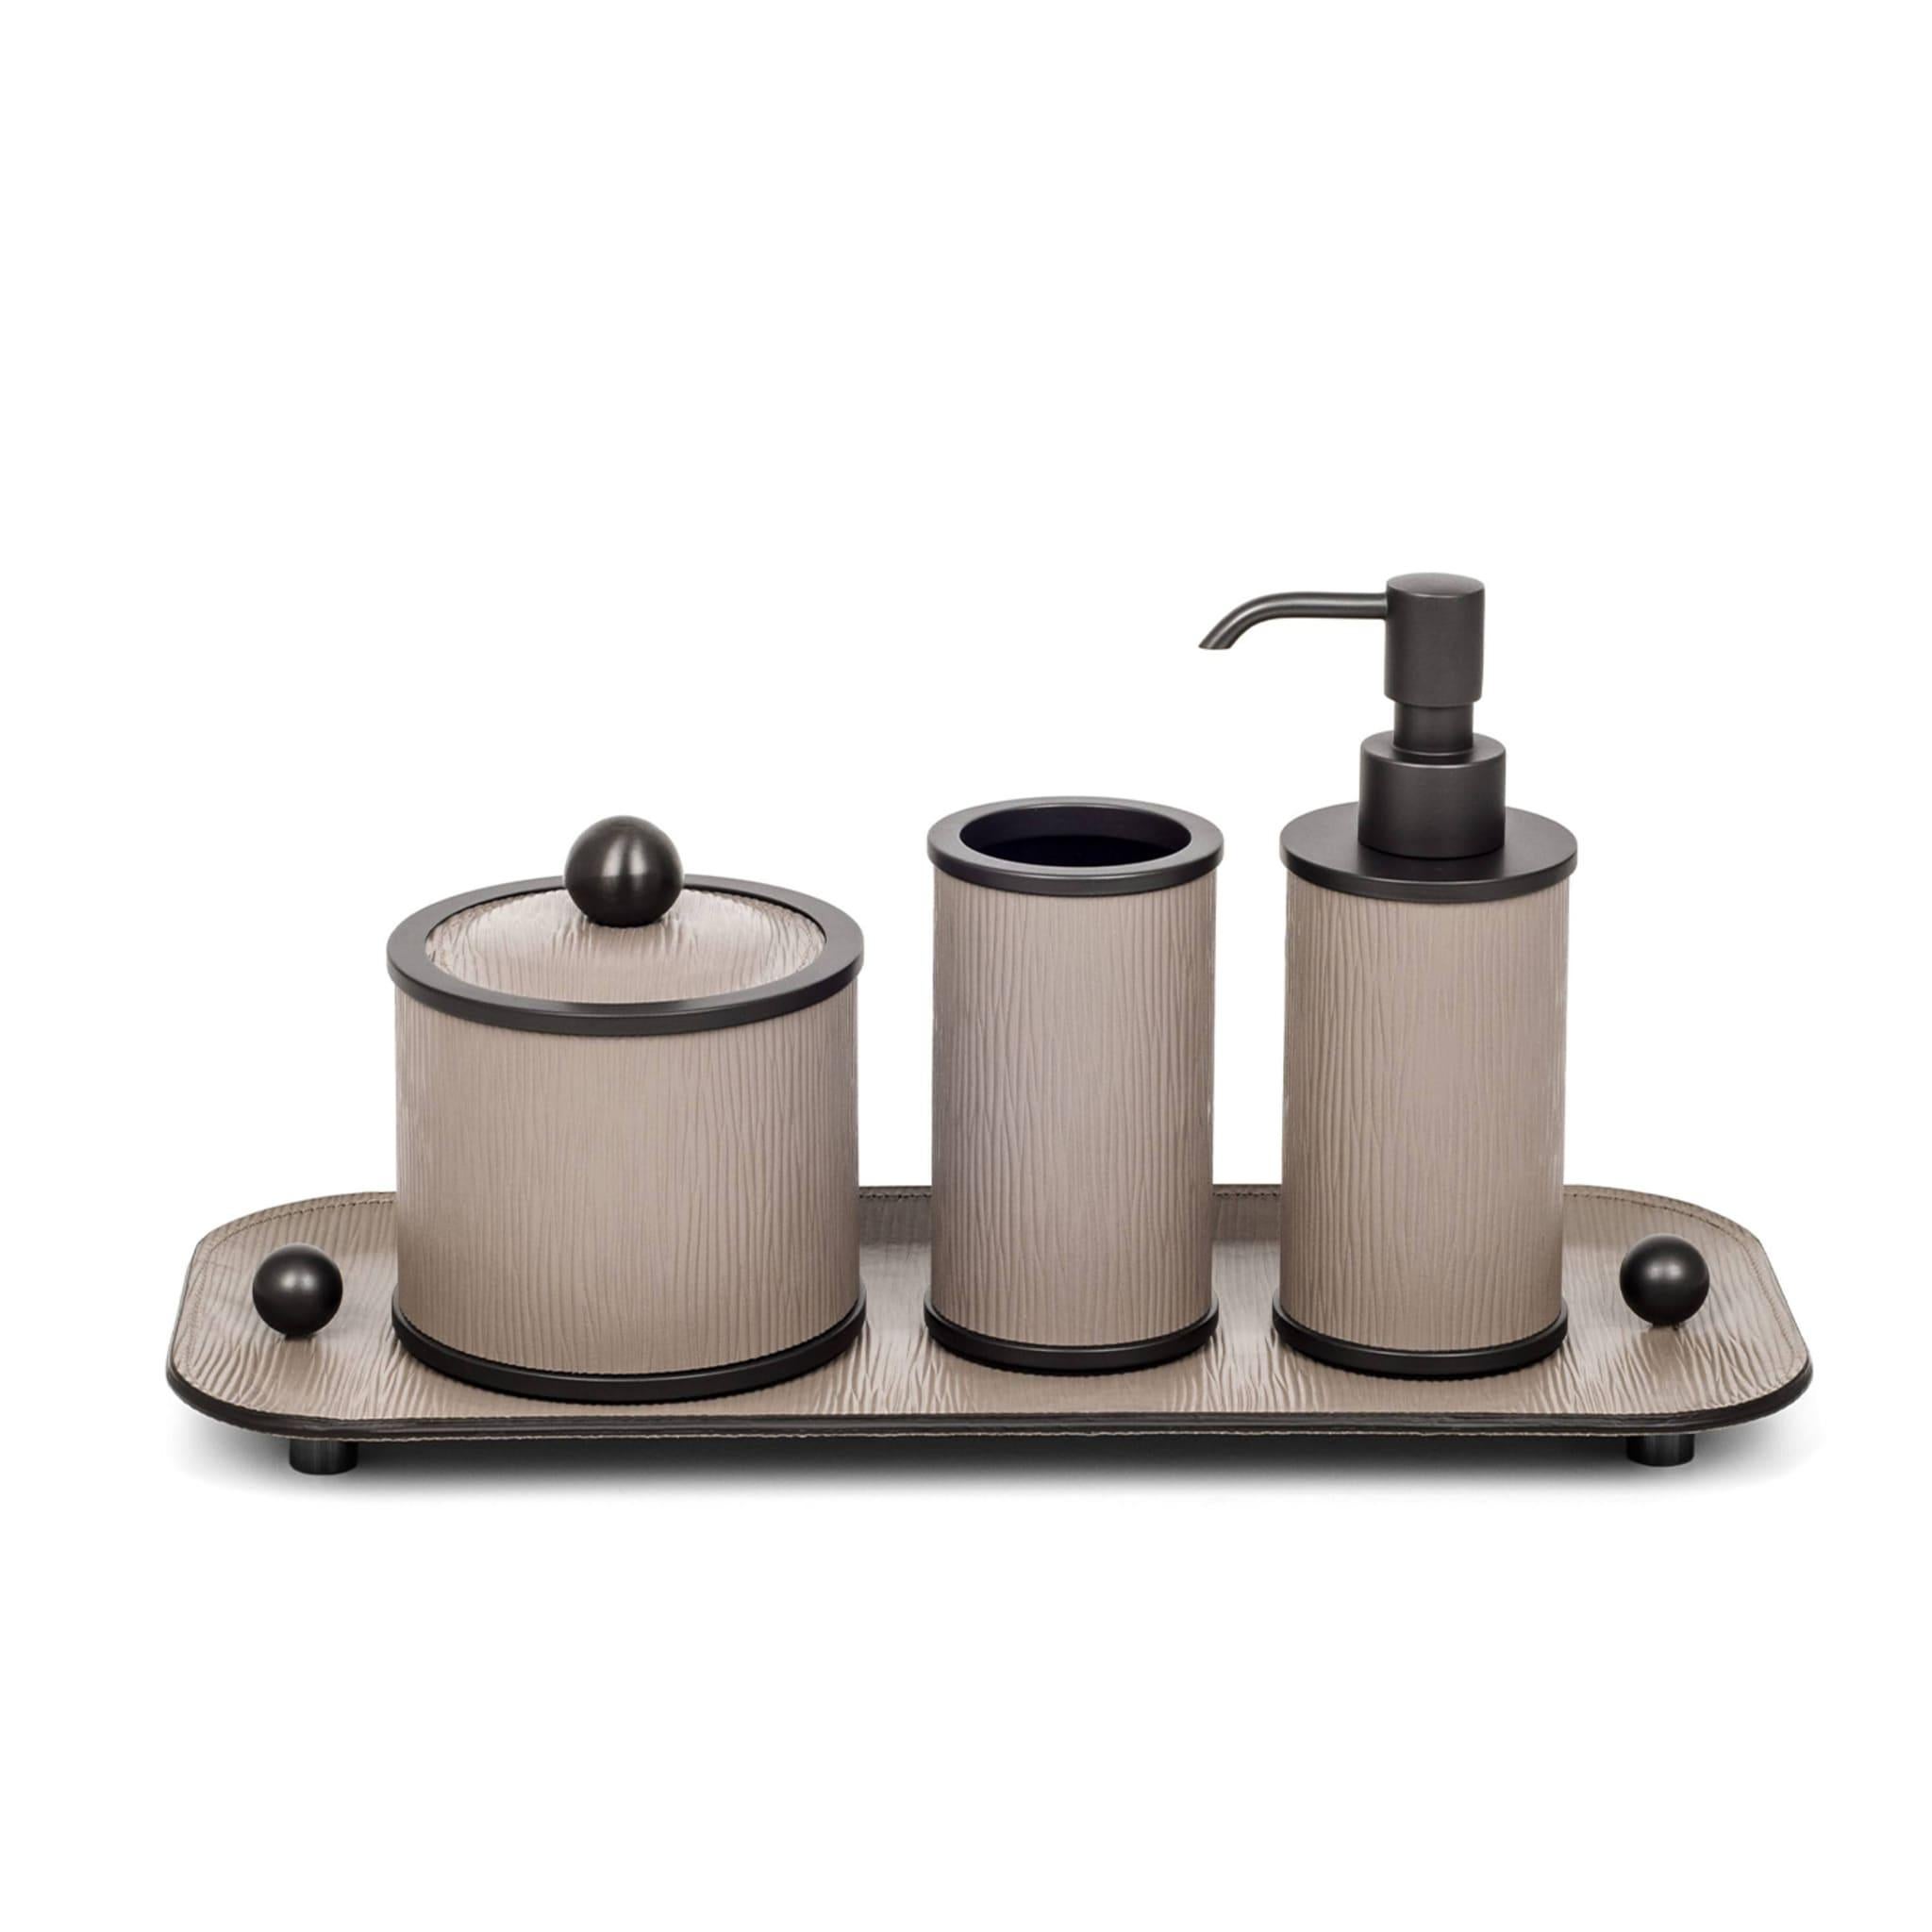 Comprising all cylindrical items resting on an elegant, coordinated tray, this luxe bathroom set consists of a soap dispenser, toothbrush holder, and two boxes with lids: one for cotton pads, and another one for beauty essentials. The pieces'